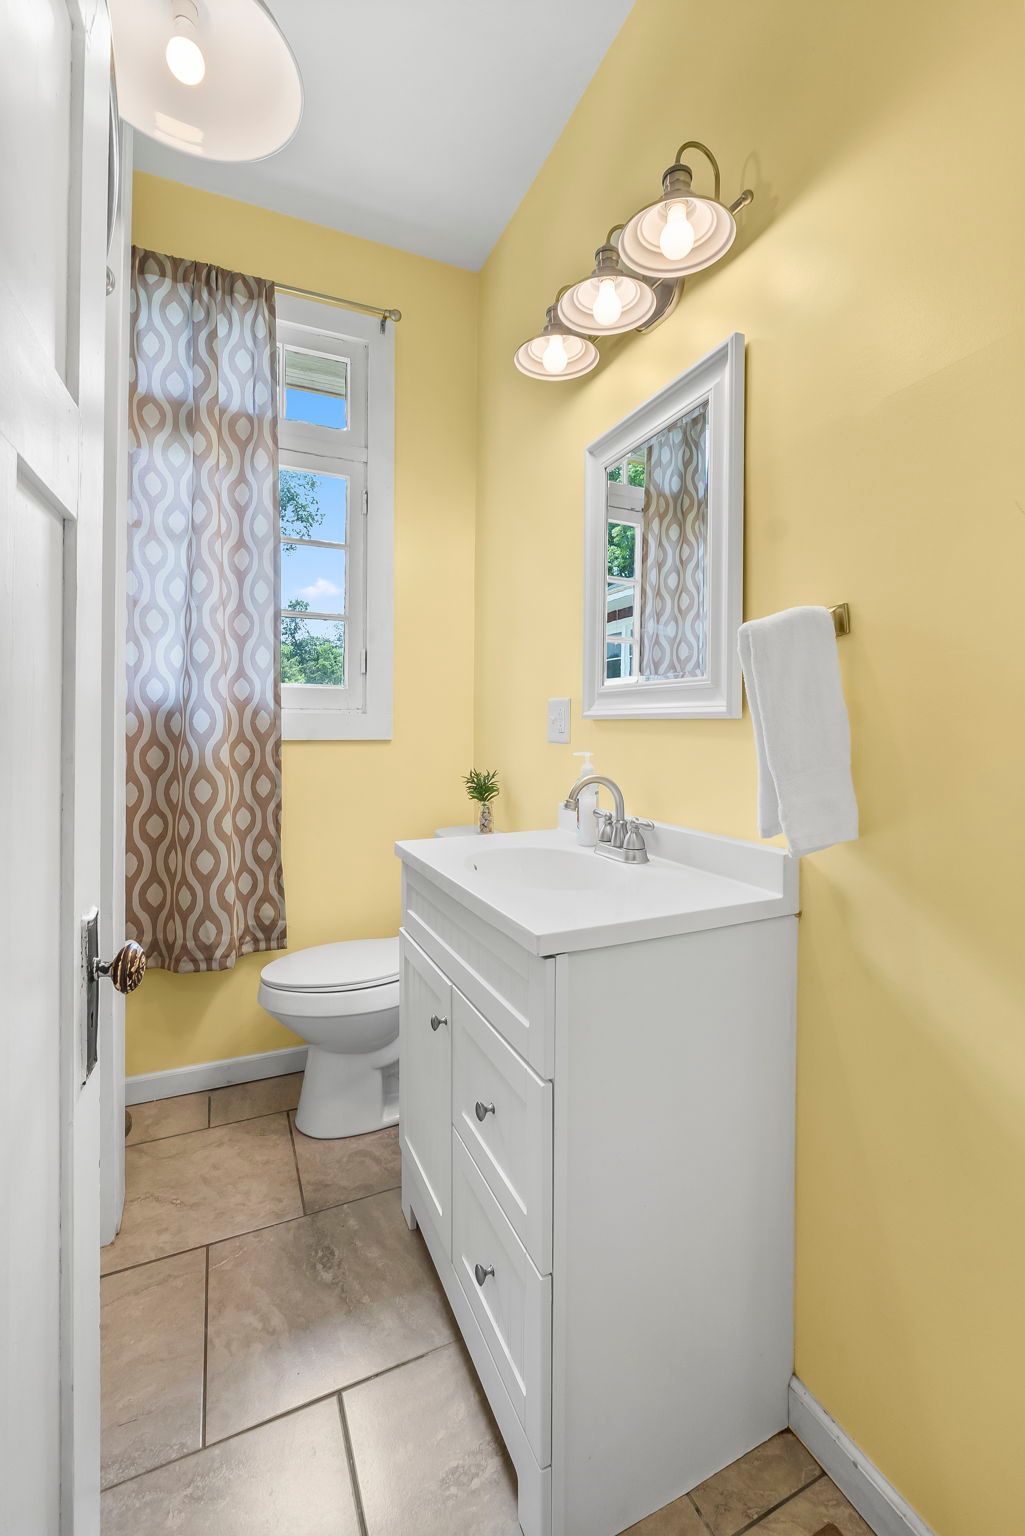 a bathroom with yellow walls , a sink , toilet and mirror .